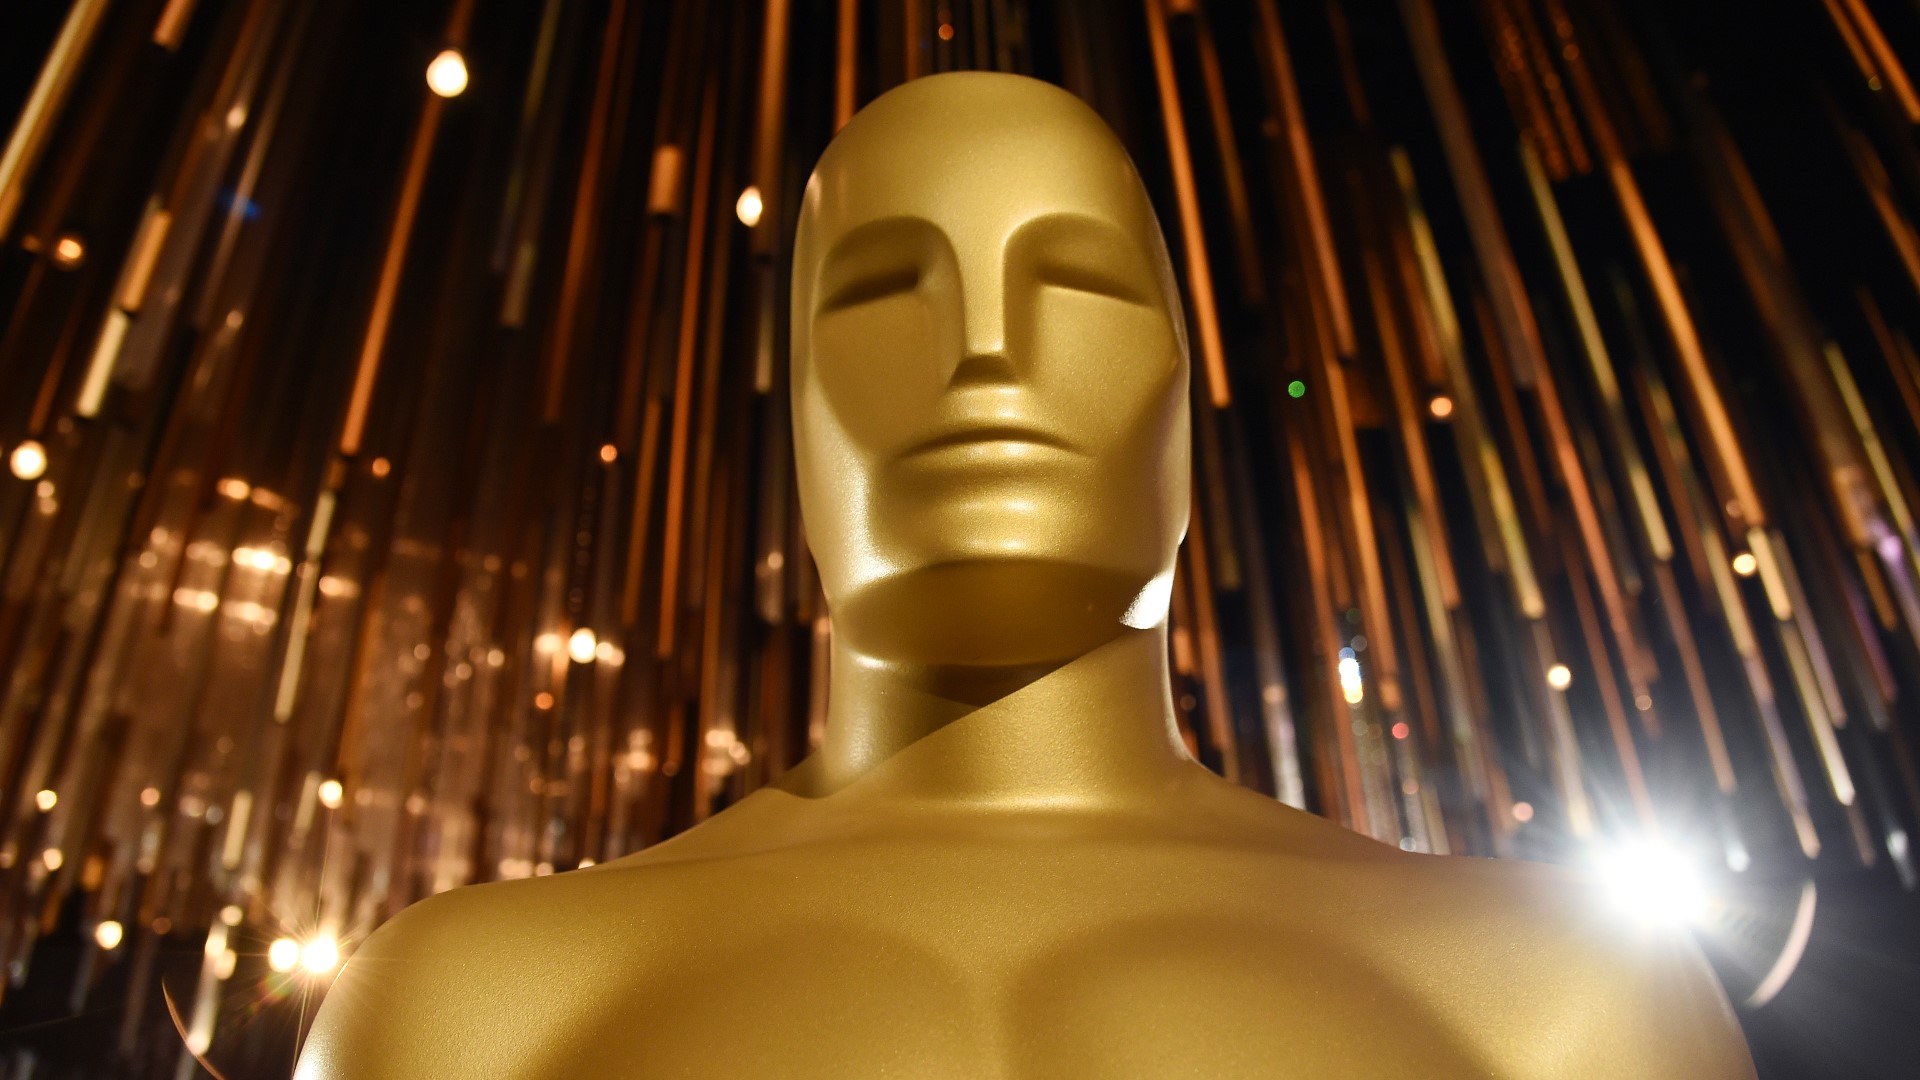 Since 1929, more than 2,000 Oscar statuettes have been handed out for the Academy Awards.